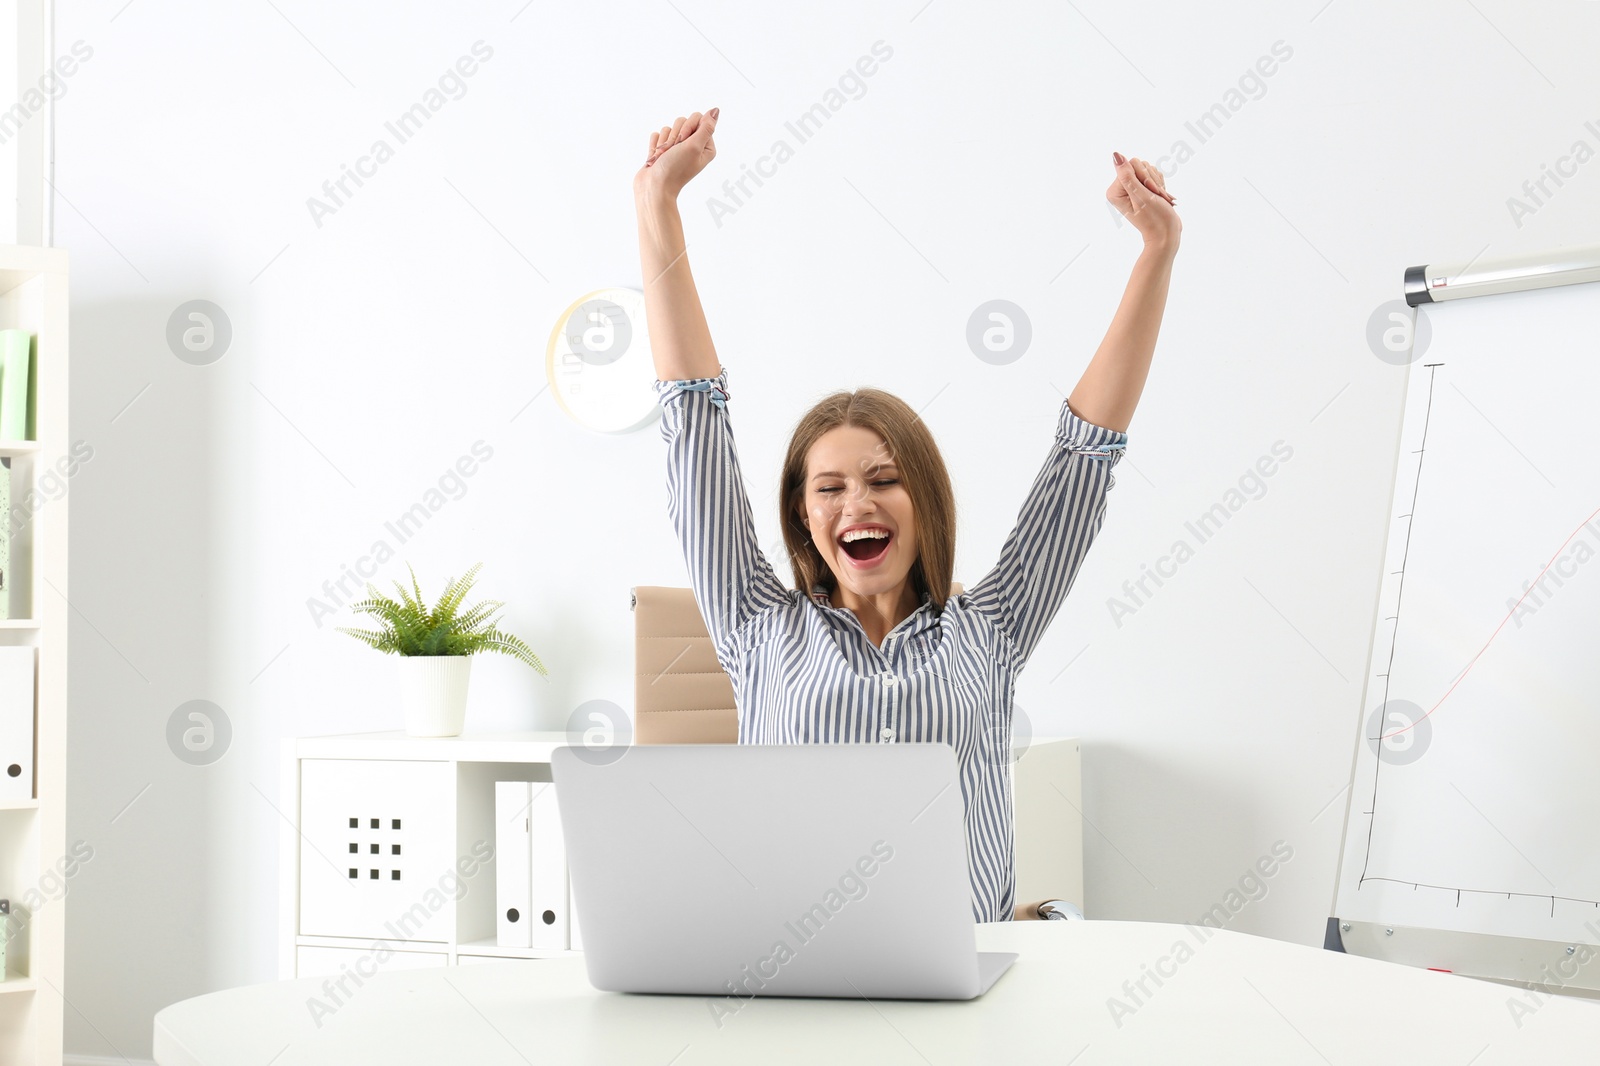 Photo of Emotional young woman with laptop celebrating victory in office